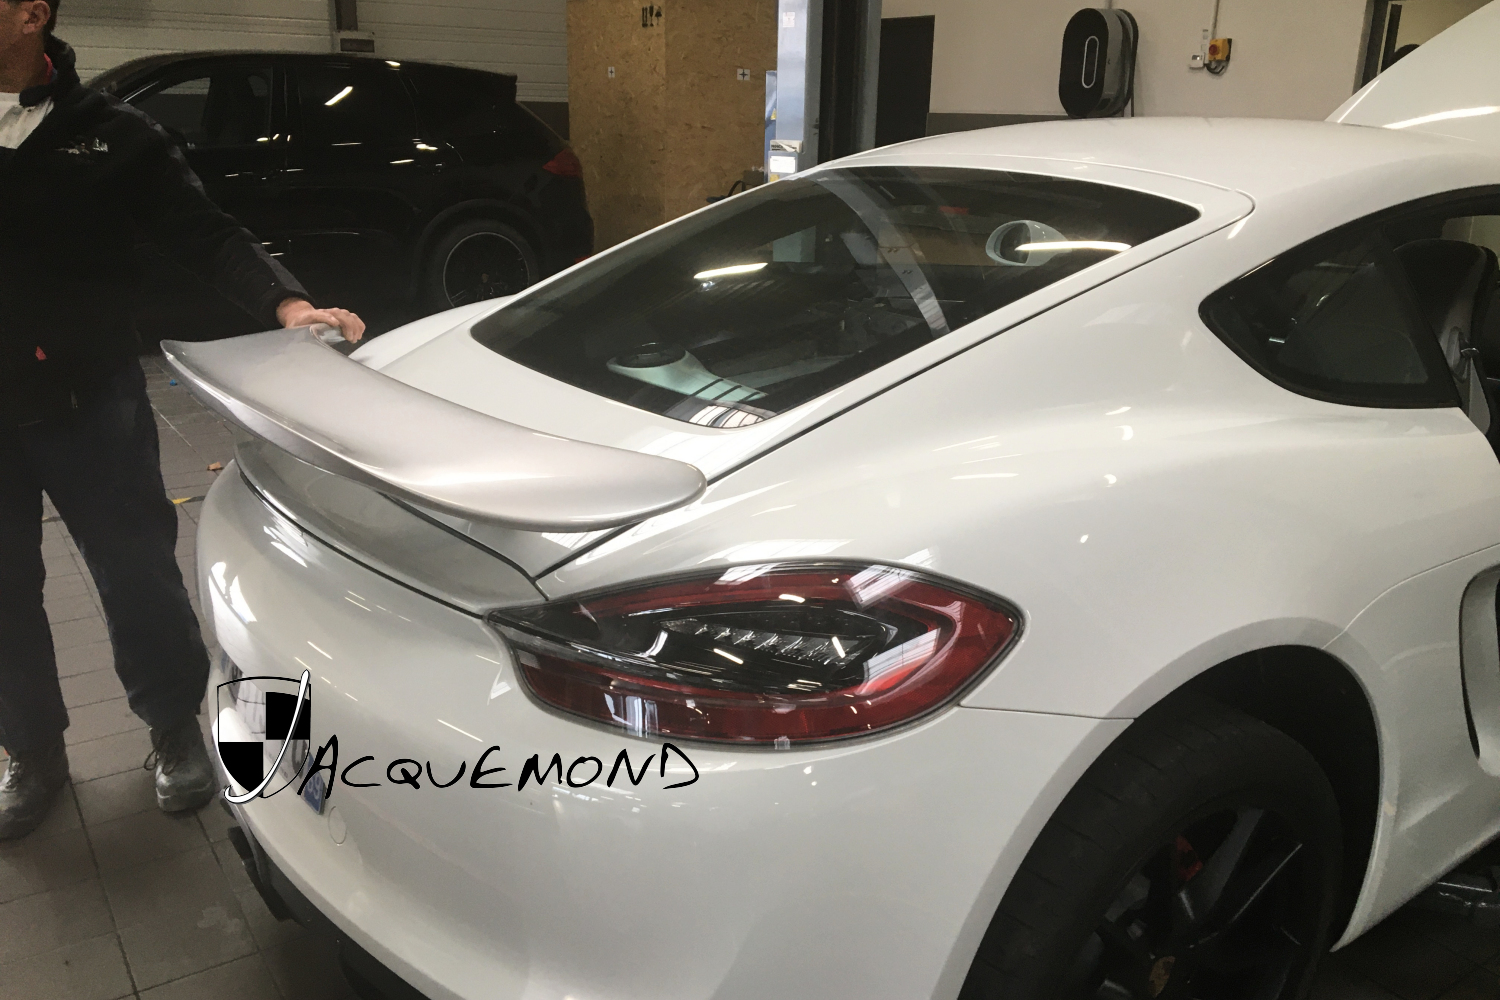 Denise rear wing for Porsche 981 Cayman by Jacquemond